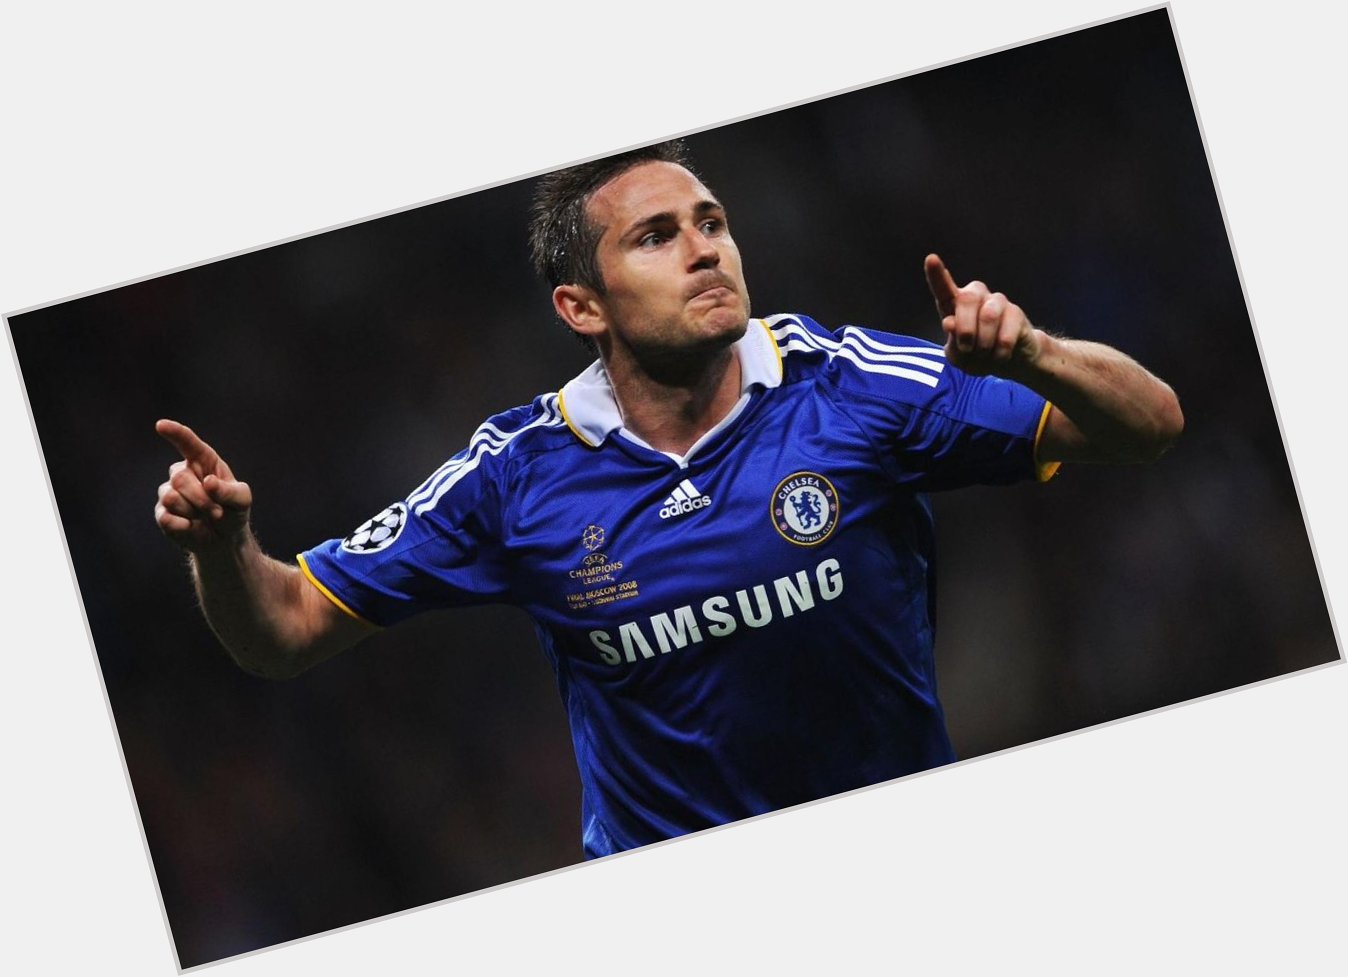 Happy birthday to one of the best ever midfielders. 

My idolo, Frank Lampard! 